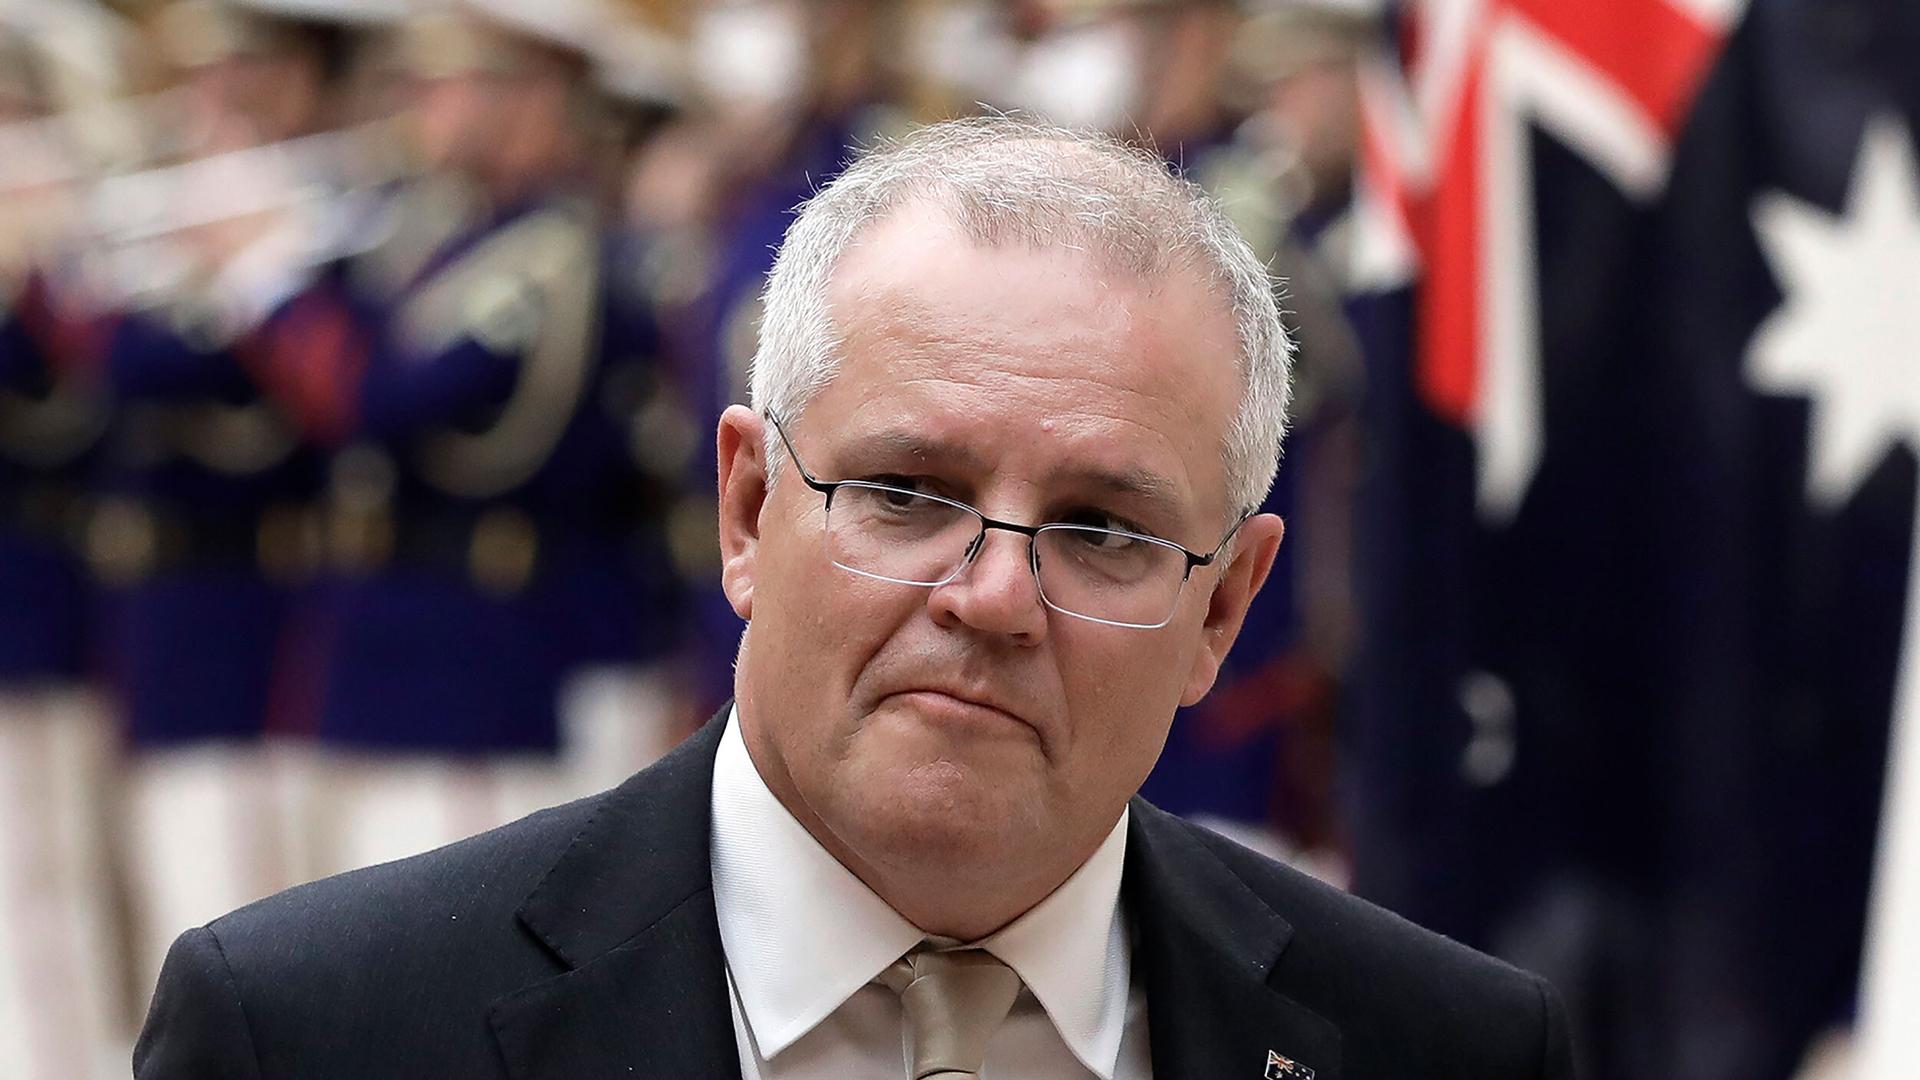 Australian Prime Minister Scott Morrison at a ceremony ahead of a meeting in Tokyo, Japan, Nov. 17, 2020.